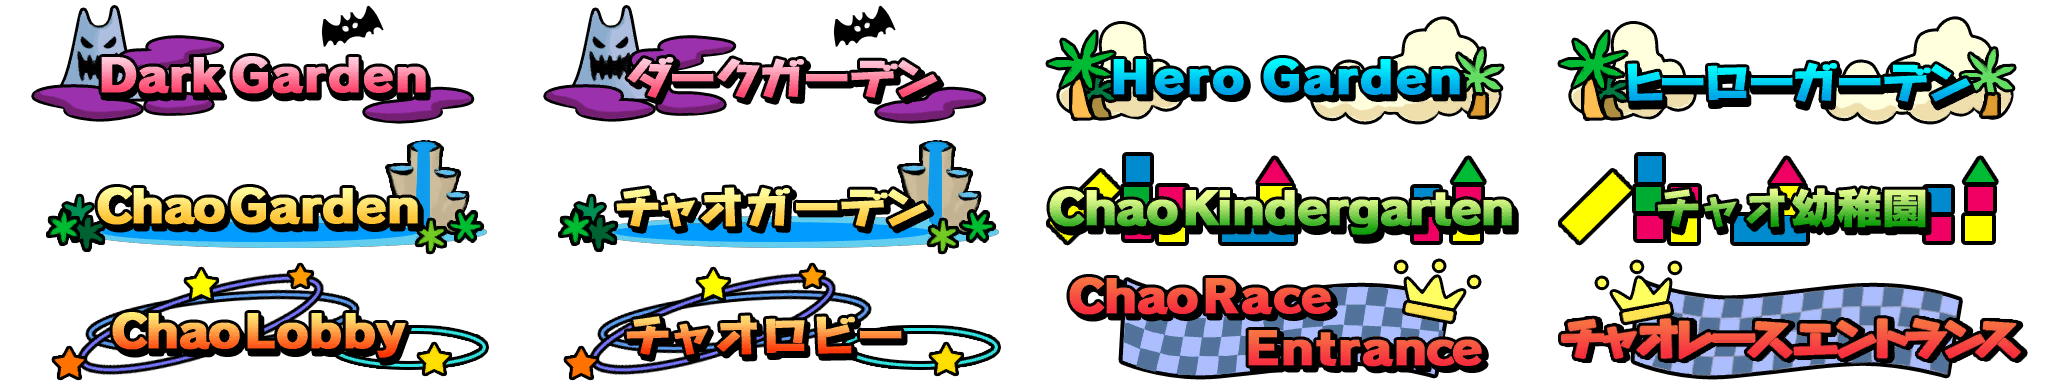 Sonic Adventure 2: Battle - Chao Area Titles